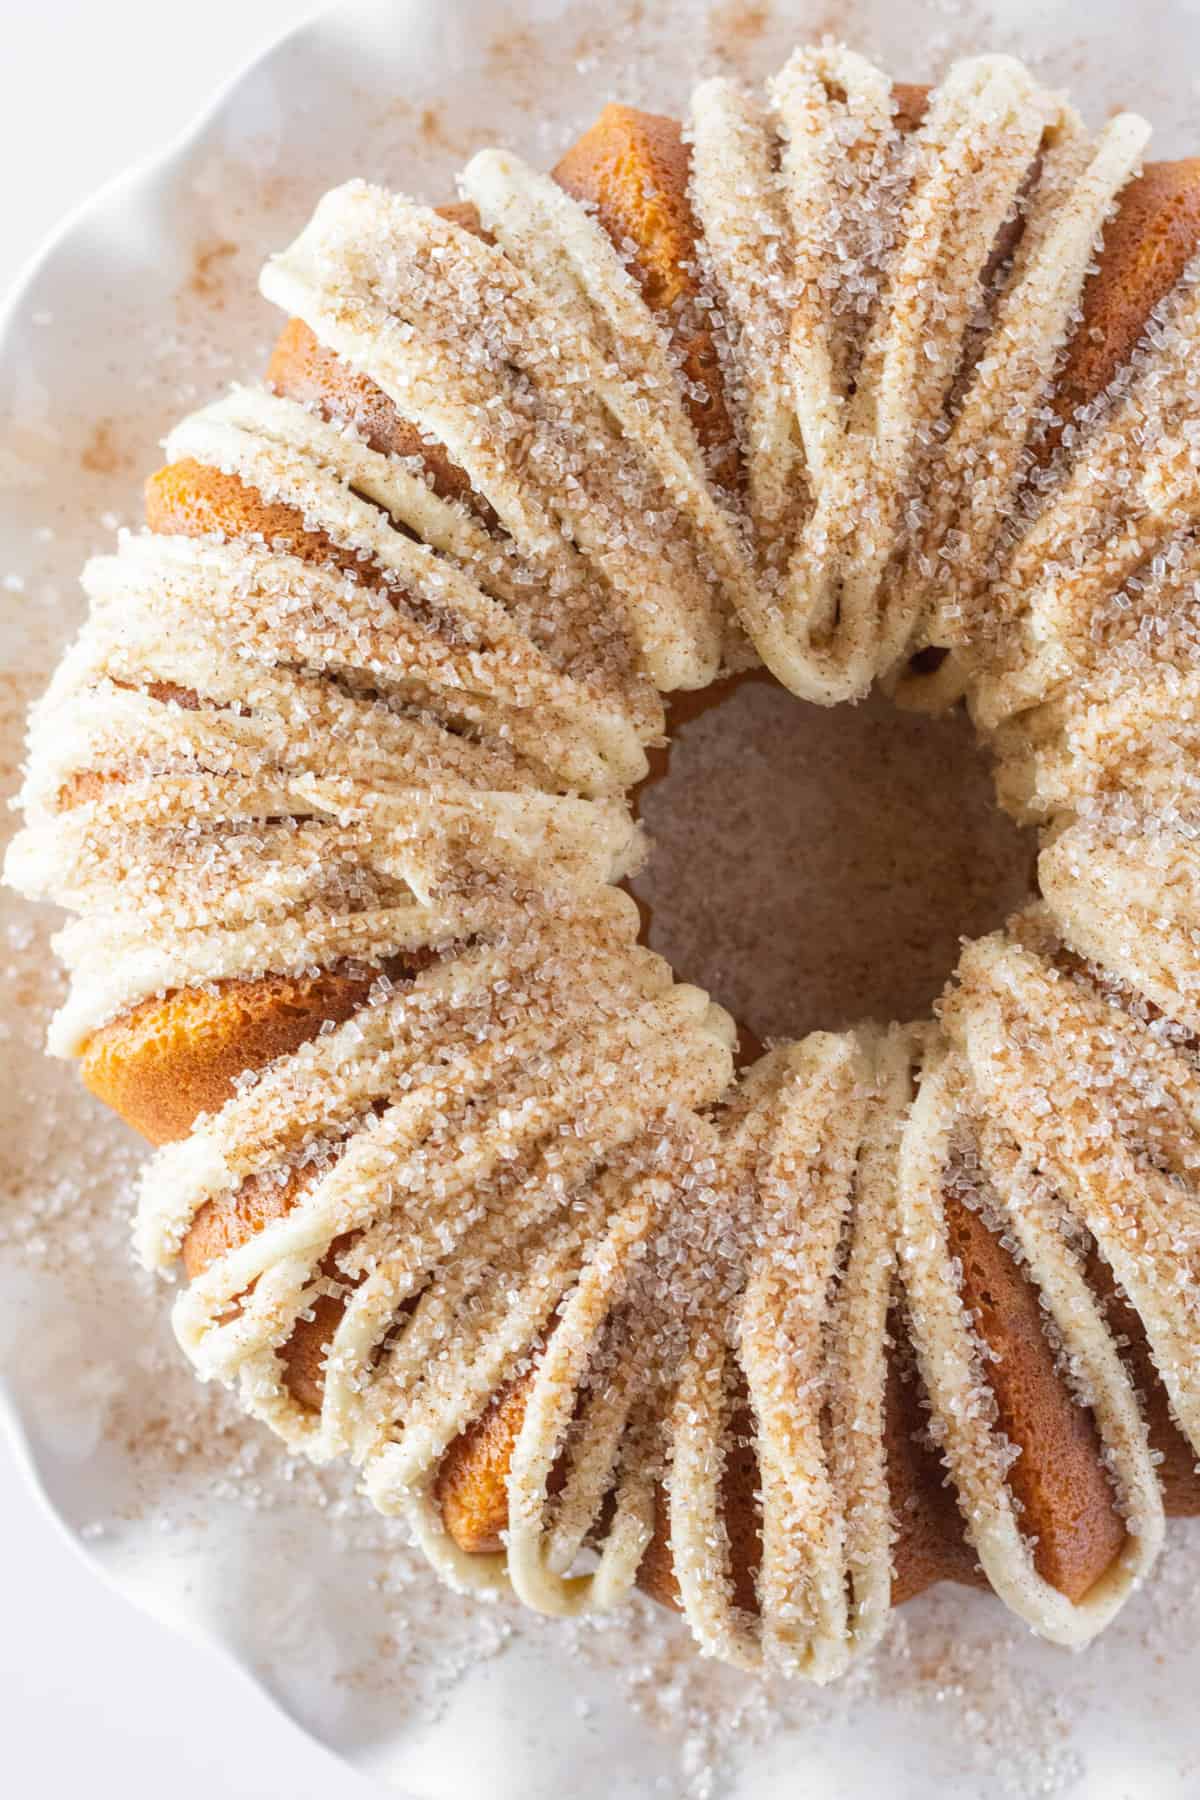 Looking at the top of a Snickerdoodle cake.